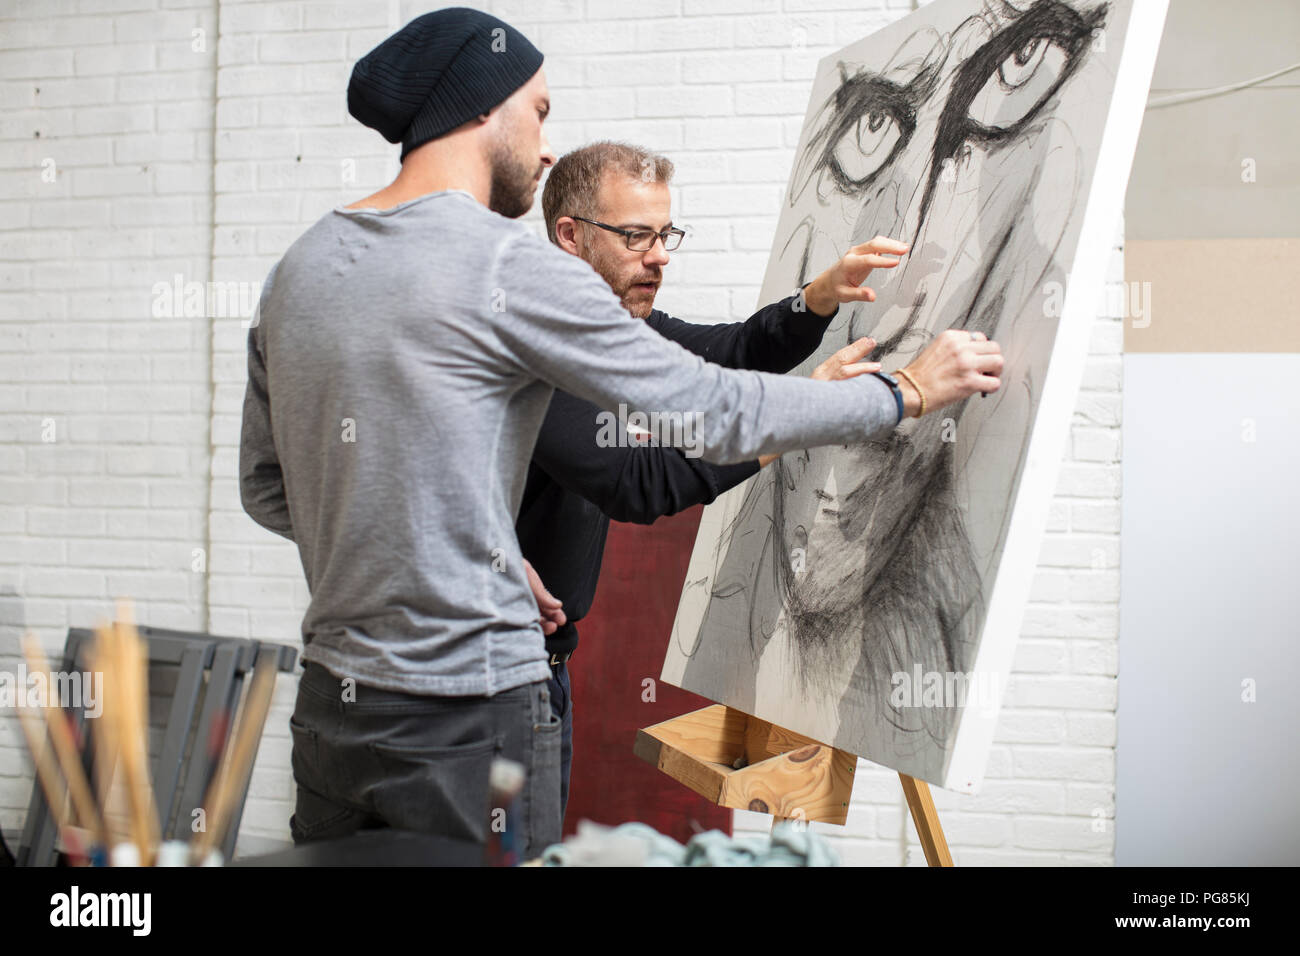 Artist discussing drawing with man in studio Stock Photo